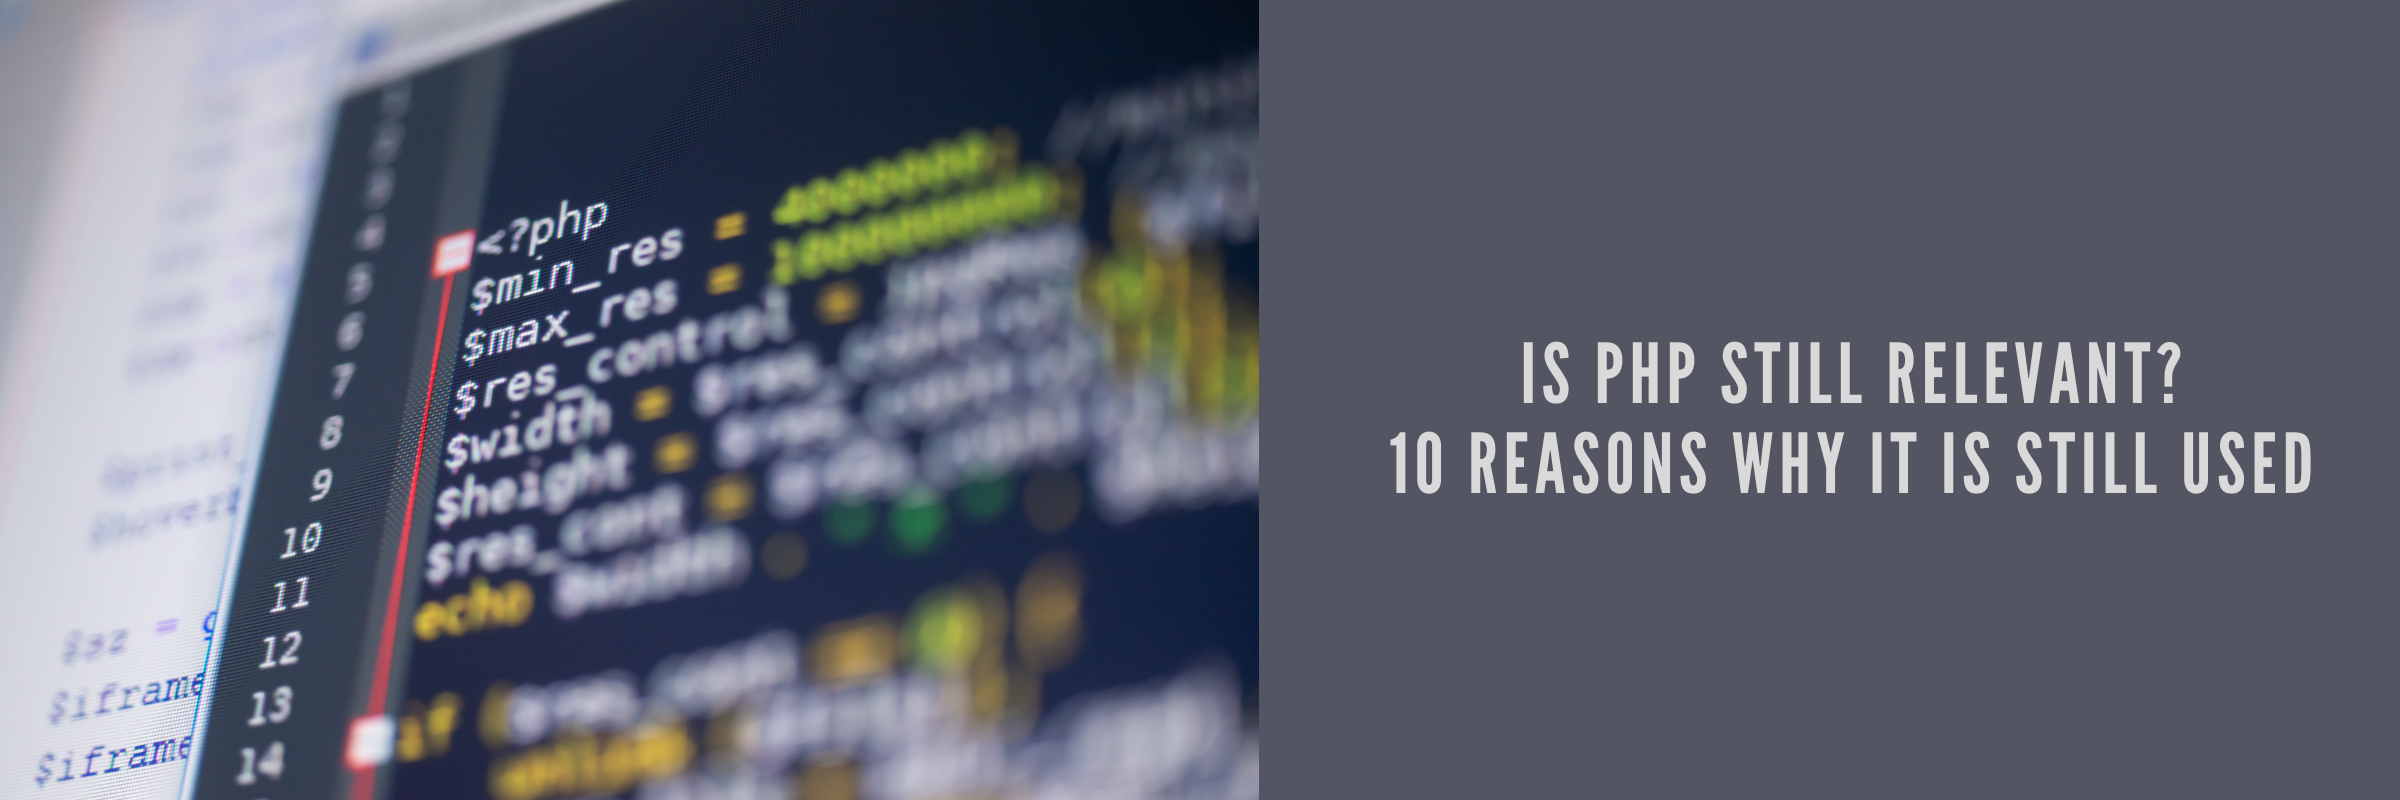 Is PHP still relevant? 10 Reasons why it is still used